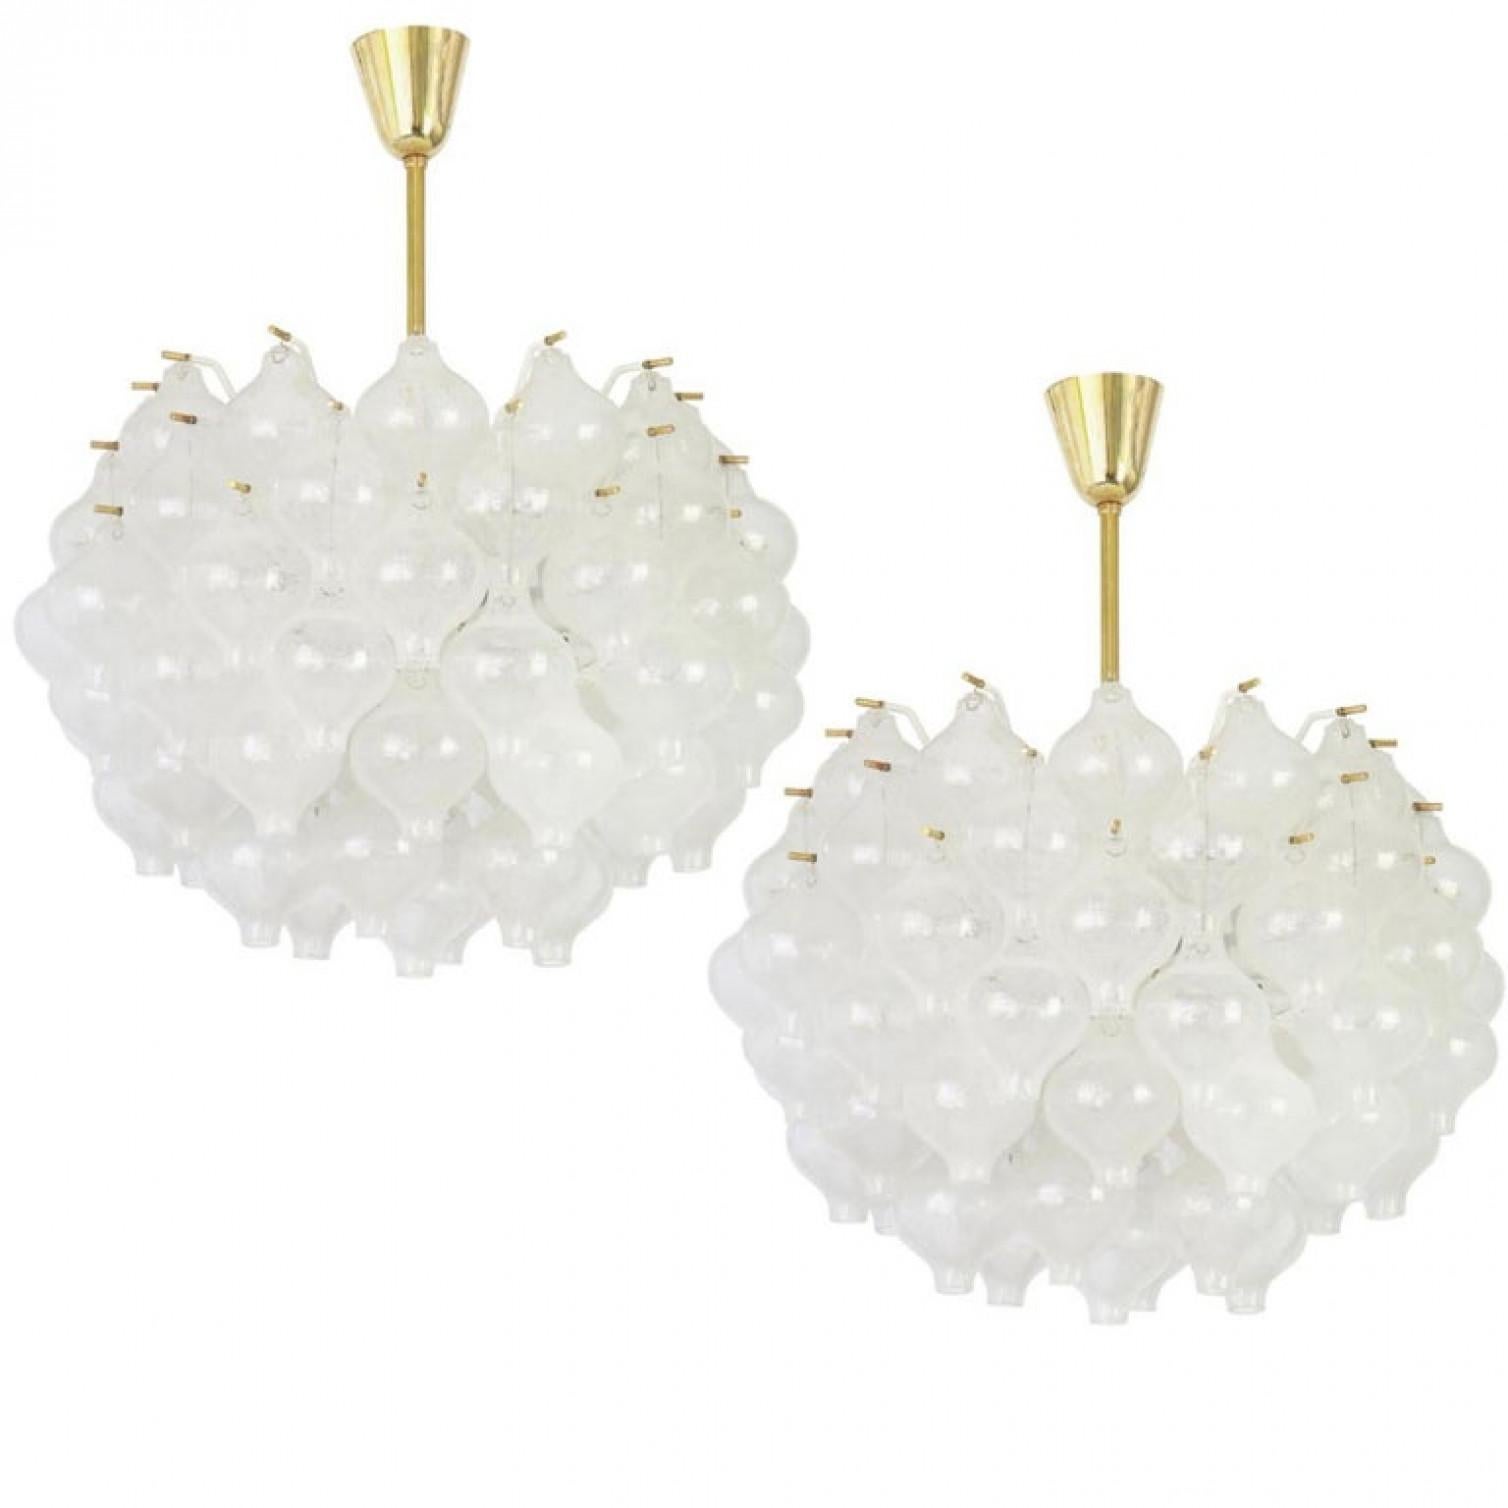 Exceptional Pair of Kalmar 'Tulipan' Wall Sconces, 1960s For Sale 5